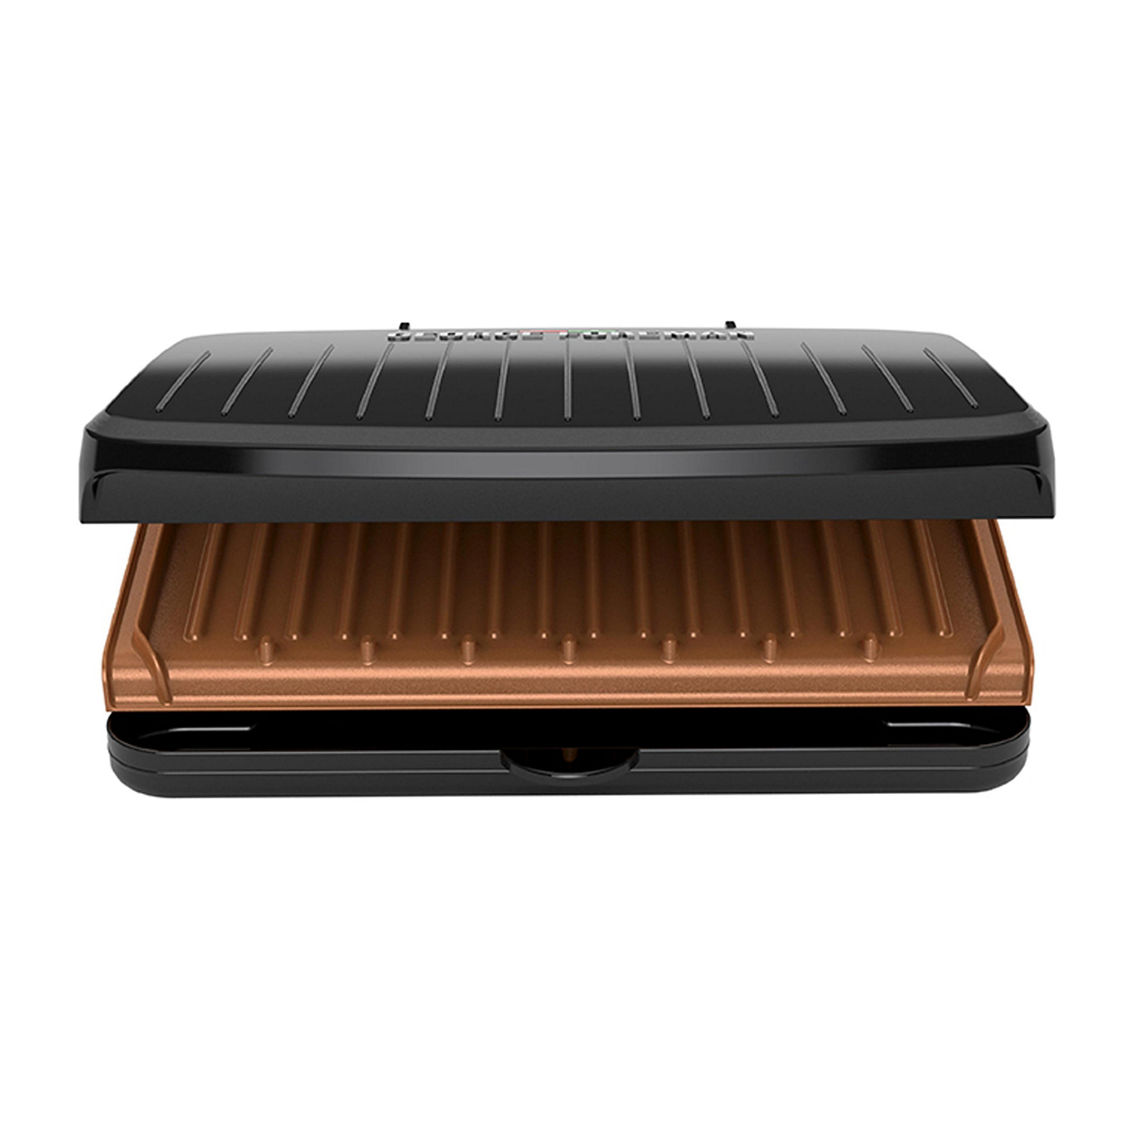 George Foreman Family Size 5 Serving Nonstick Compact Electric Indoor Grill in B - Image 2 of 5